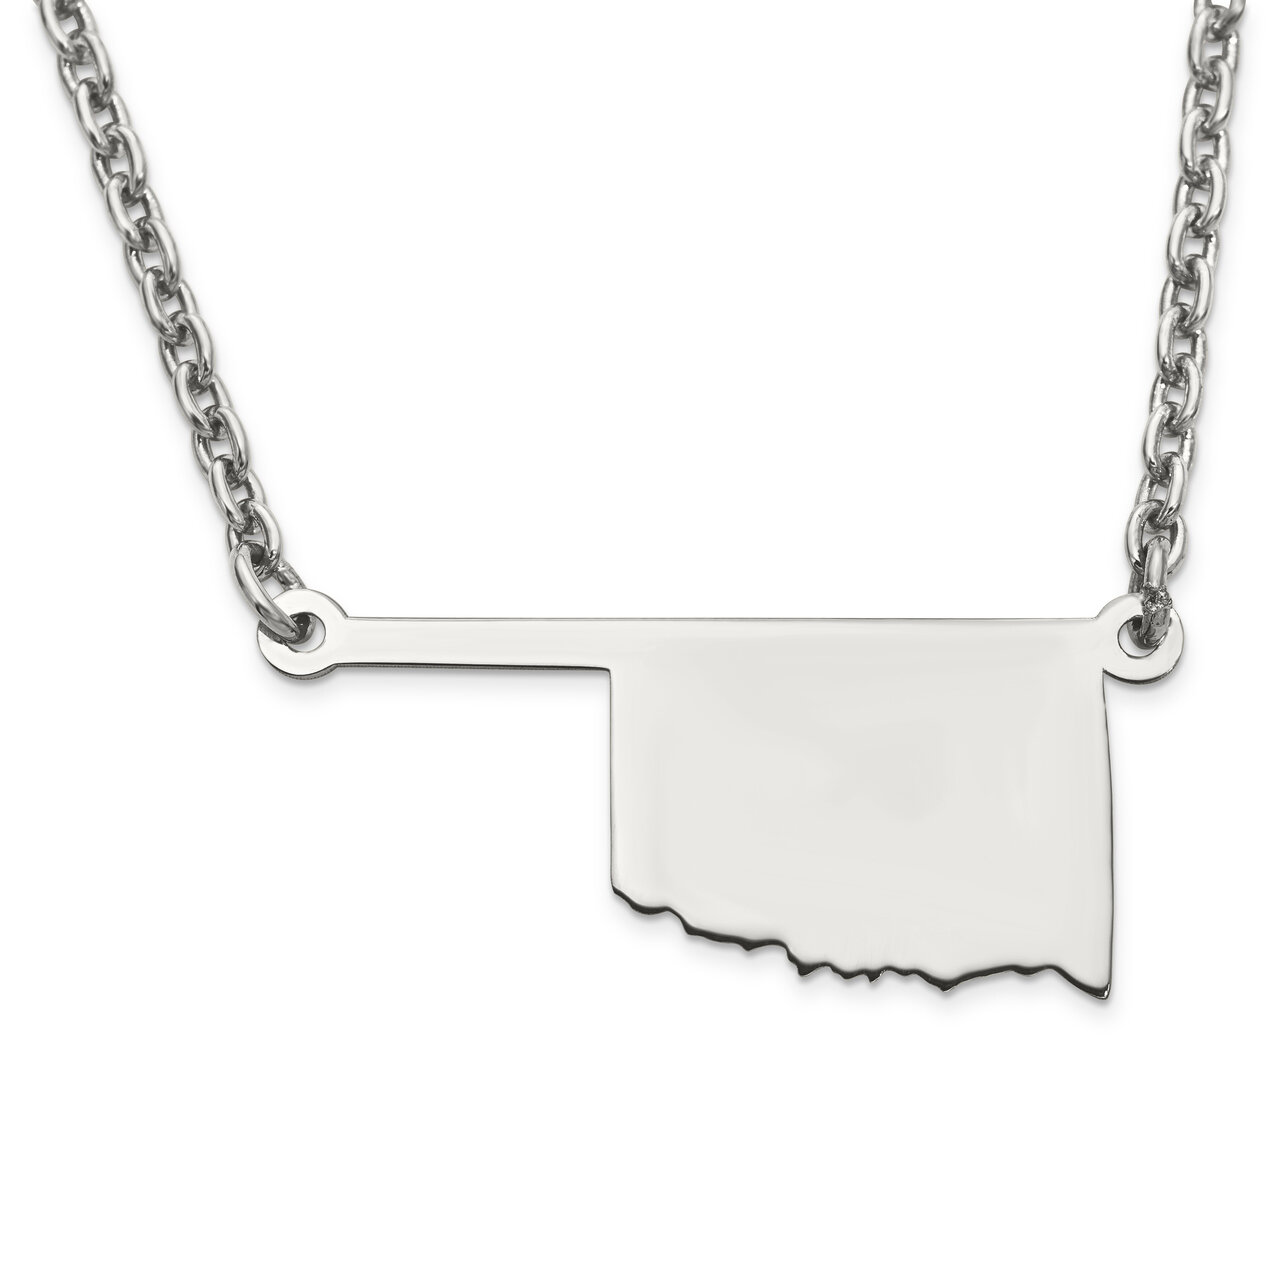 Oklahoma State Pendant Necklace with Chain 14k White Gold Engravable XNA706W-OK